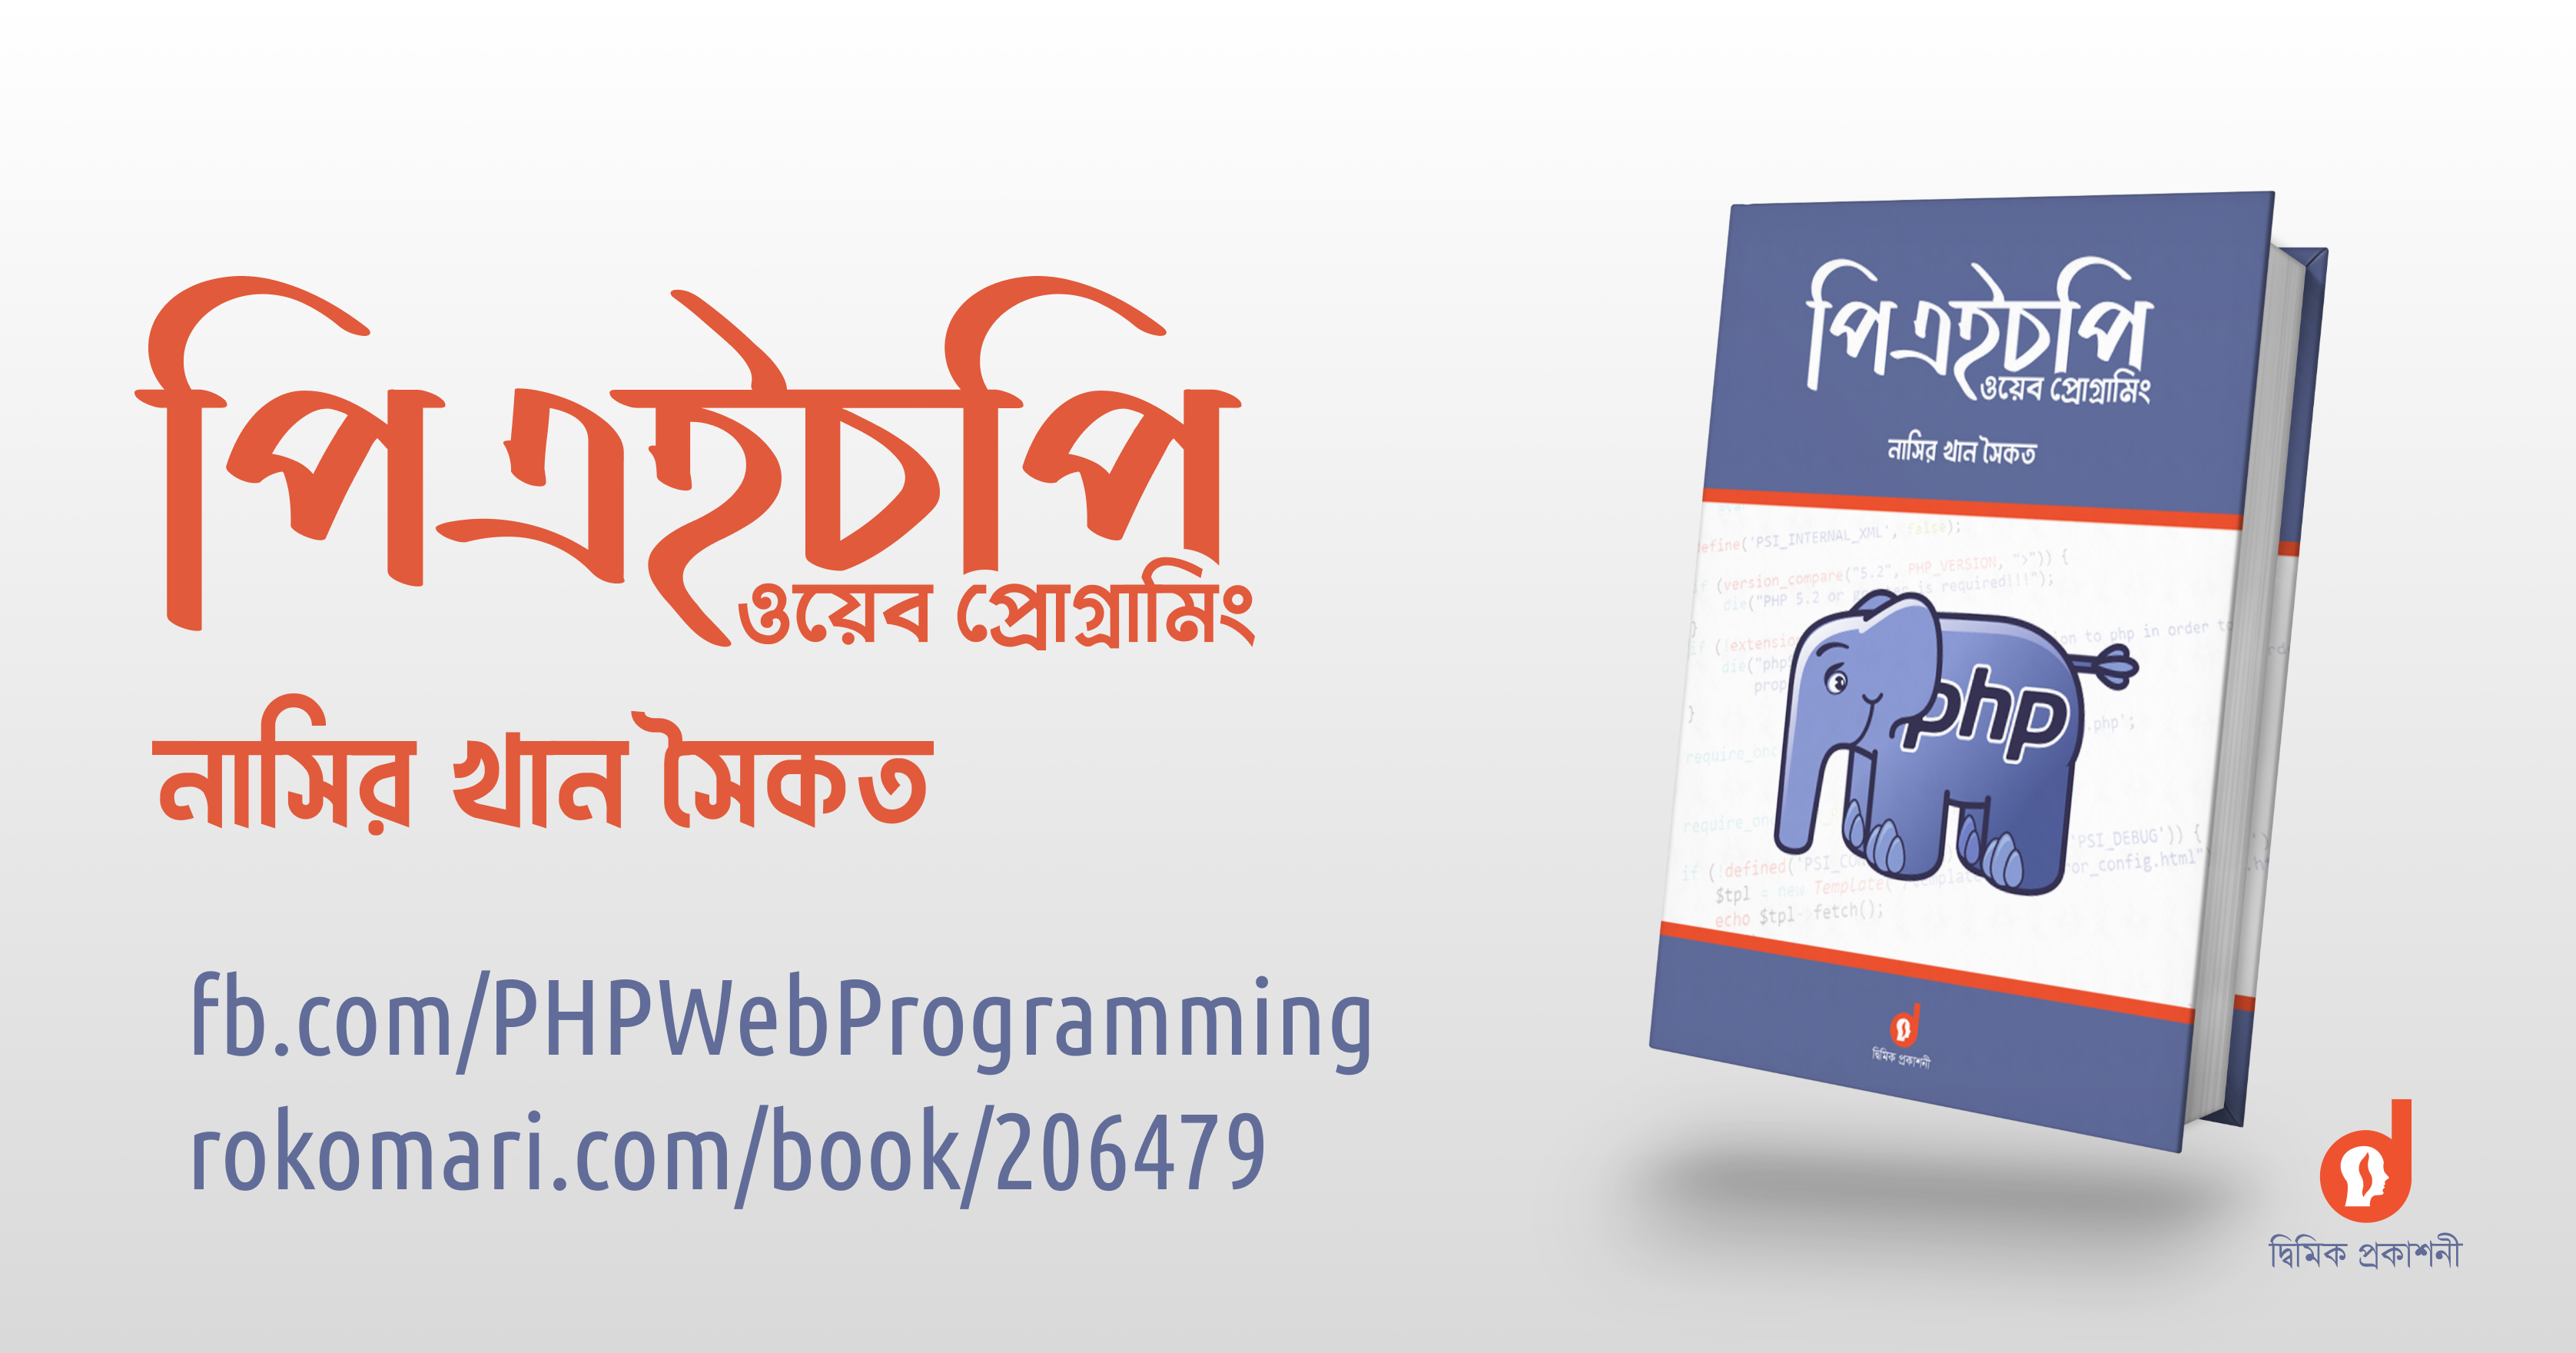 php web programming book banner